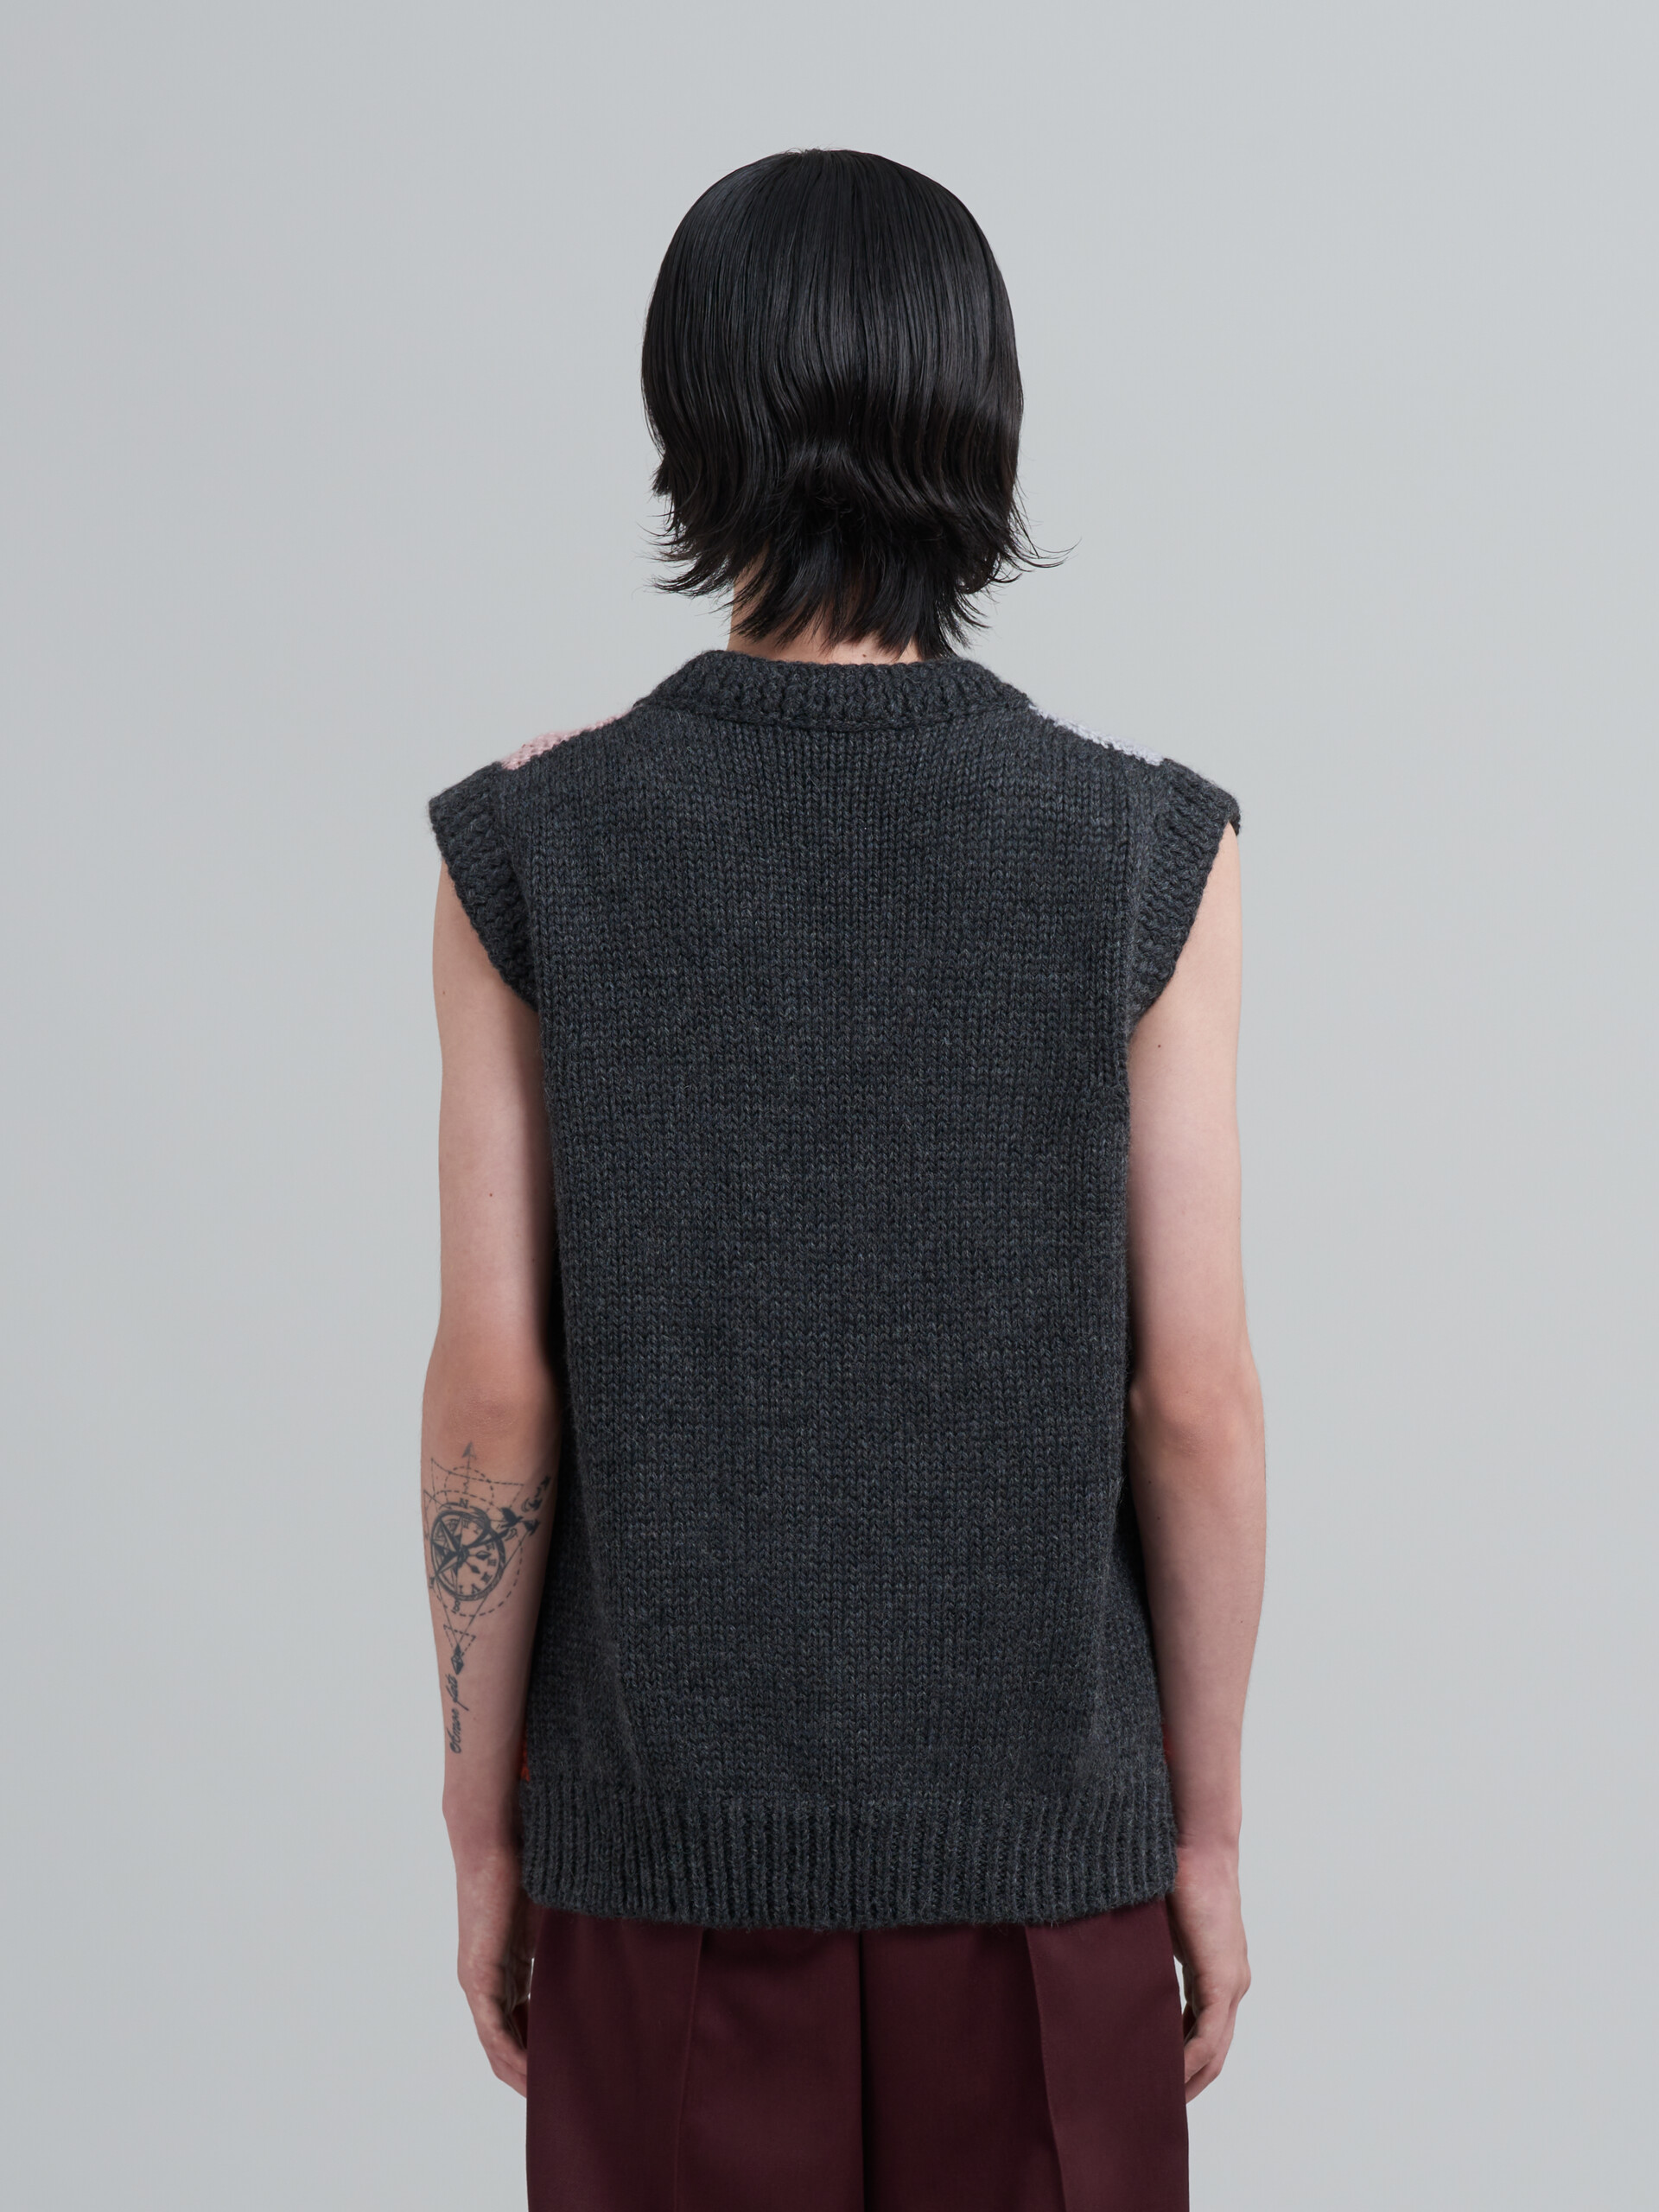 Handmade crochet wool and cotton V-neck vest - Pullovers - Image 3